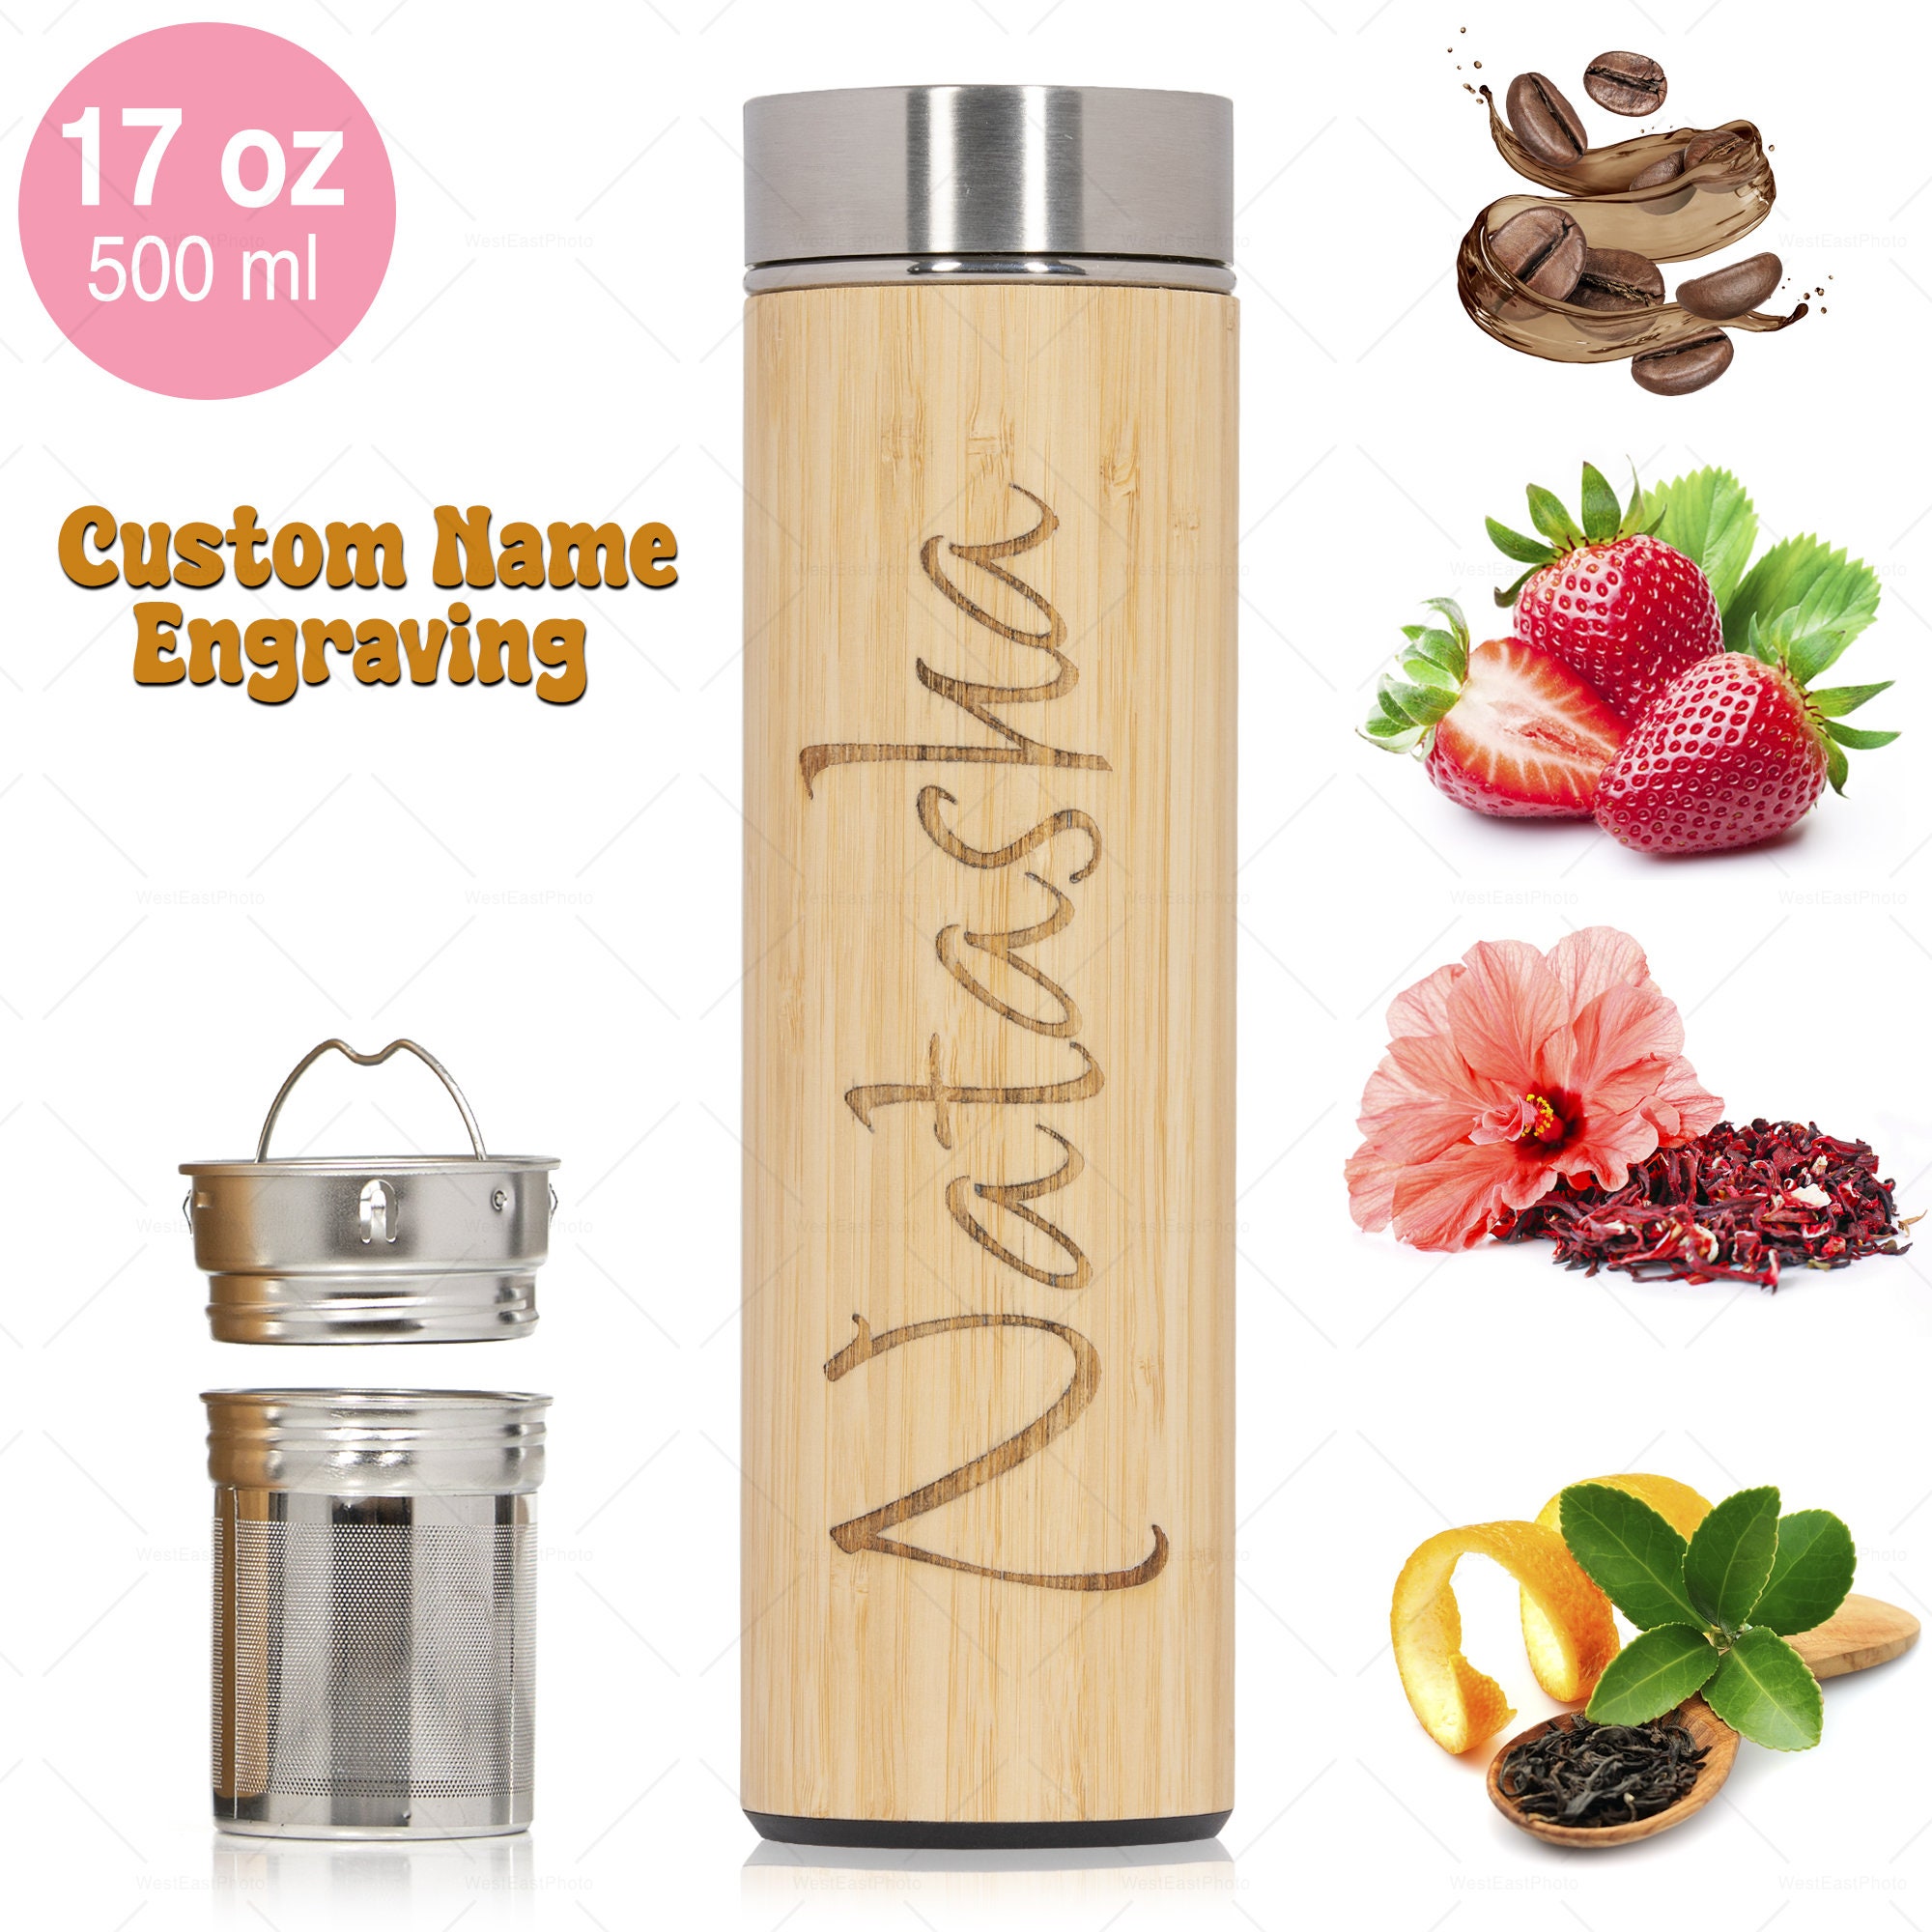  Smart Water Bottle with LED Temperature Display,Tea Infuser  Bottle,Travel Coffee Mug,17oz/500ml Insulated Water Bottle,Flask for hot  and cold drinks: Home & Kitchen